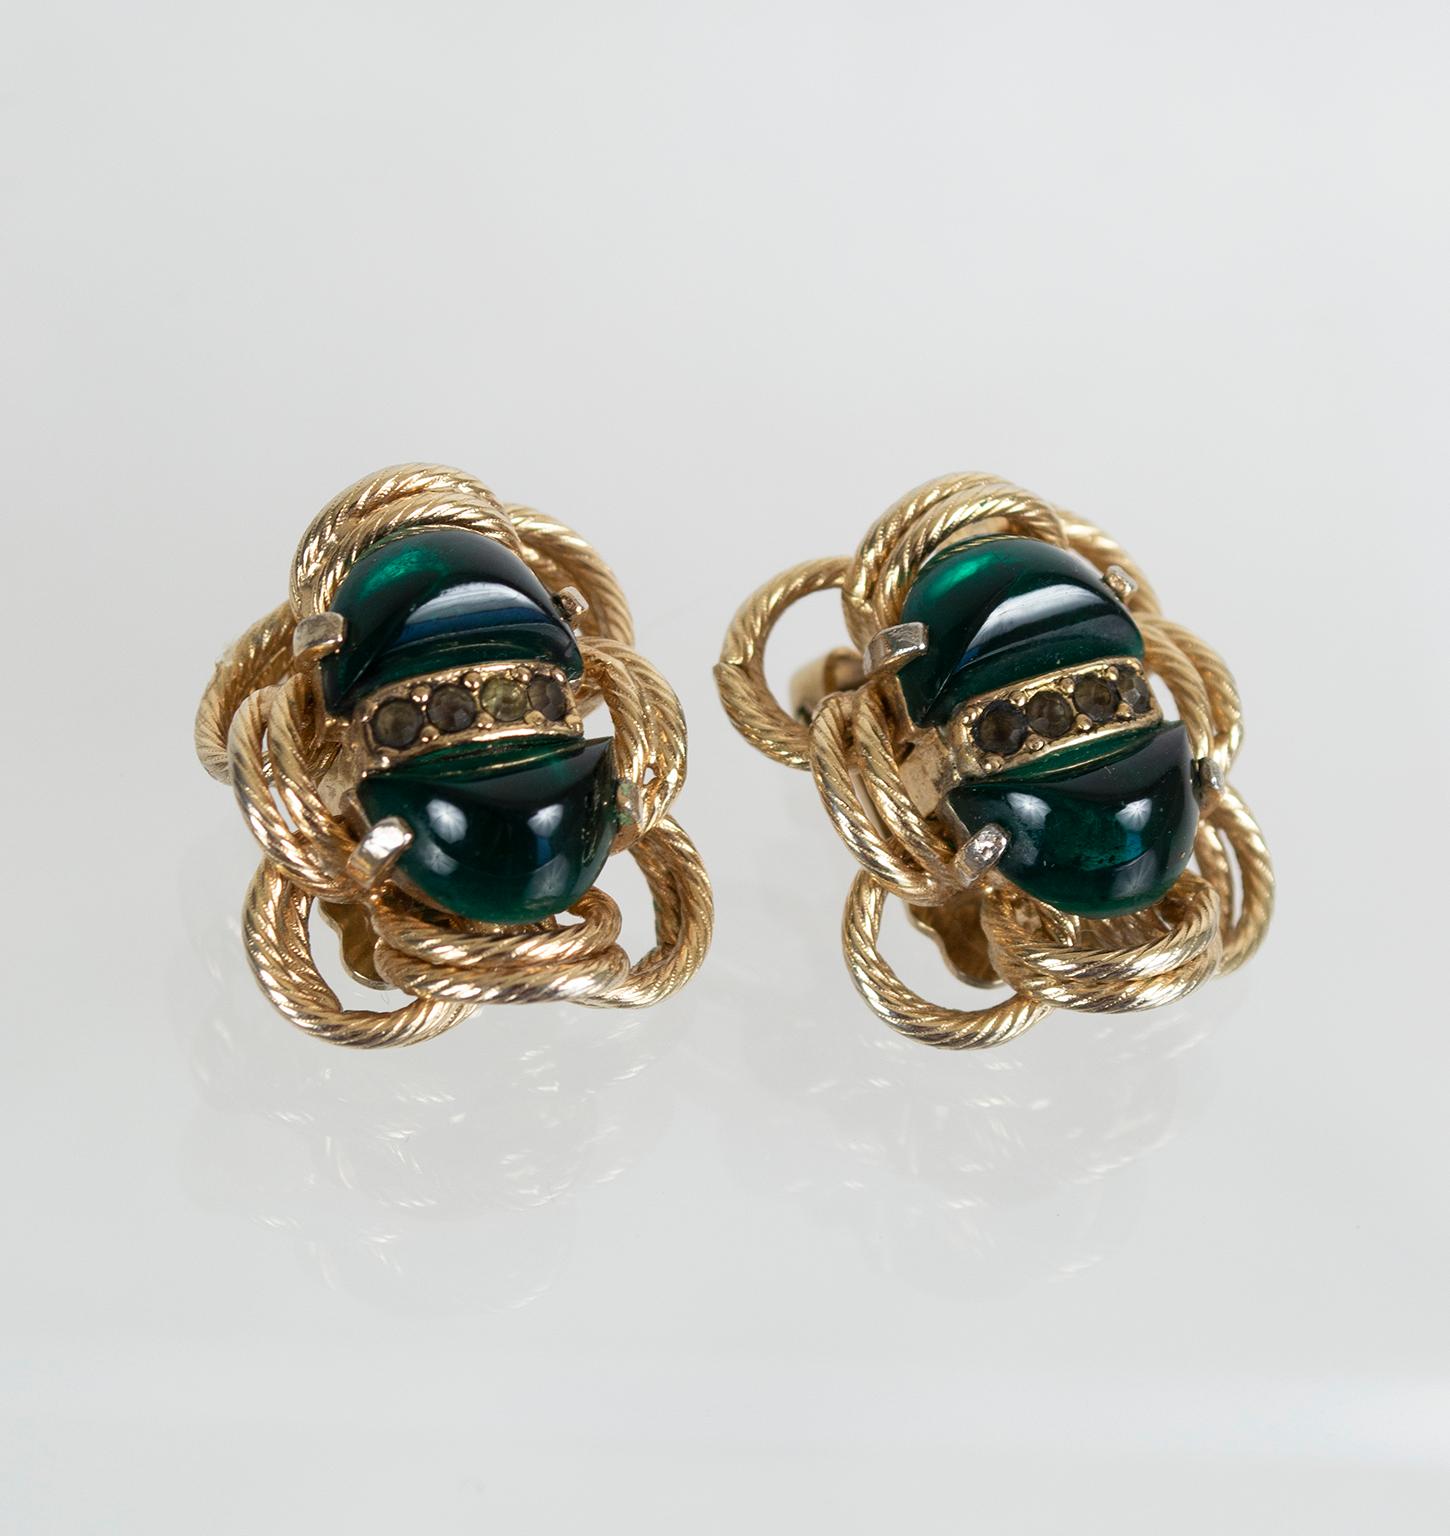 Though their emerald color and oblong shape are suggestive of scarab beetles, Eisenberg actually improved on nature by making these earrings of glass. Surrounded by bright goldtone metal 